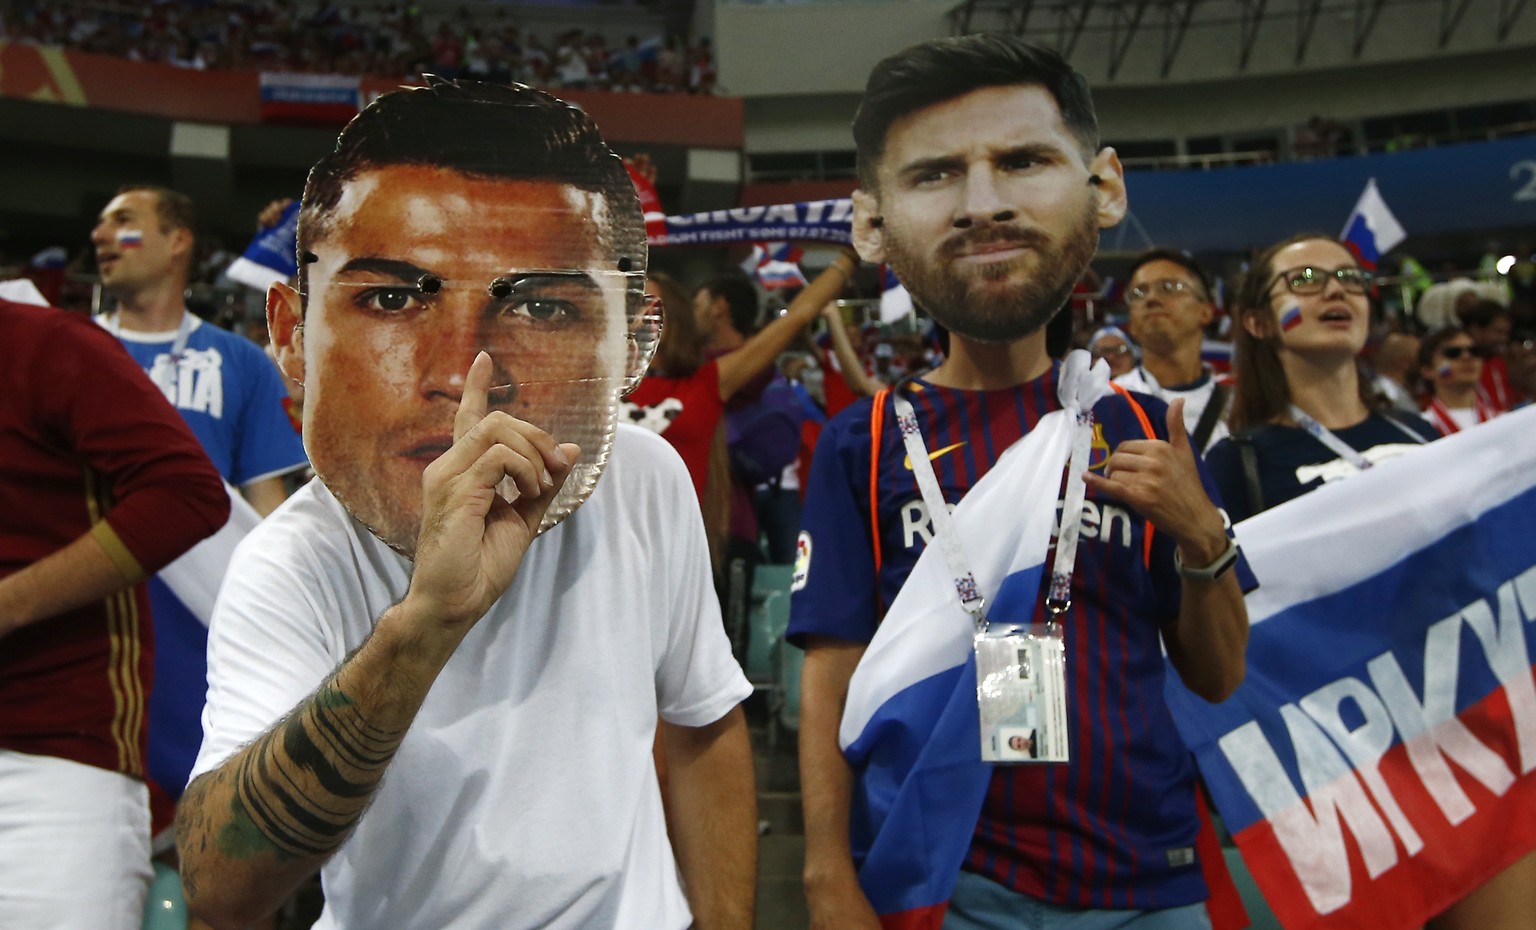 Fans wear masks with the face of the Portuguese national soccer star Cristiano Ronaldo and Argentina national soccer star Lionel Messi prior to the start of the quarterfinal match between Russia and C ...